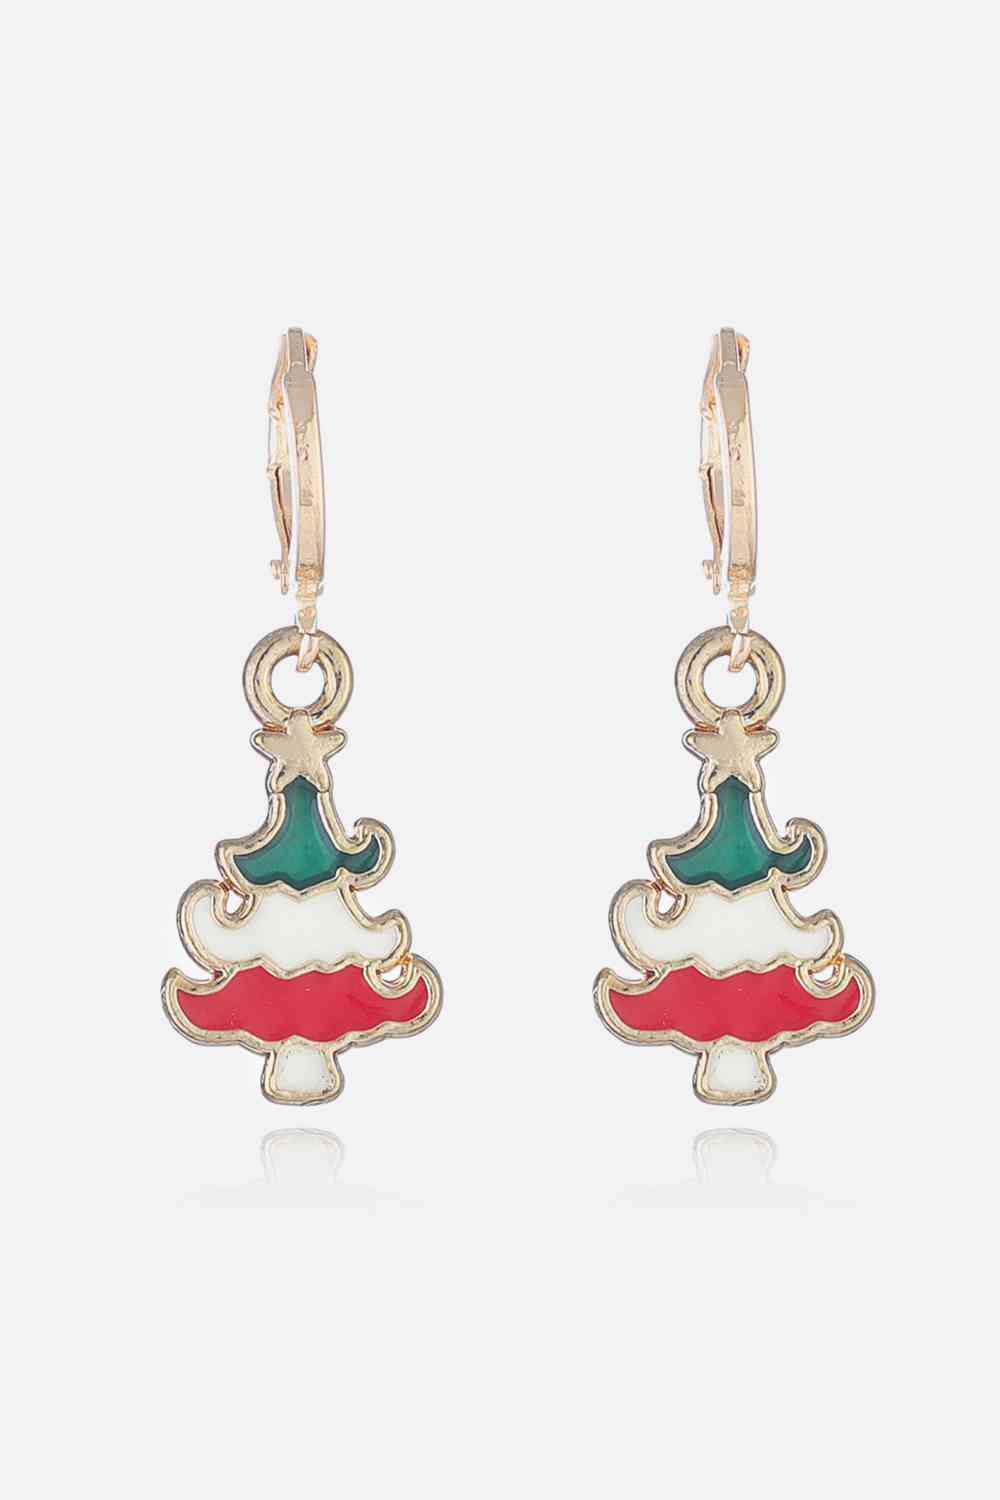 Christmas Alloy Earrings for Women Style E One Size